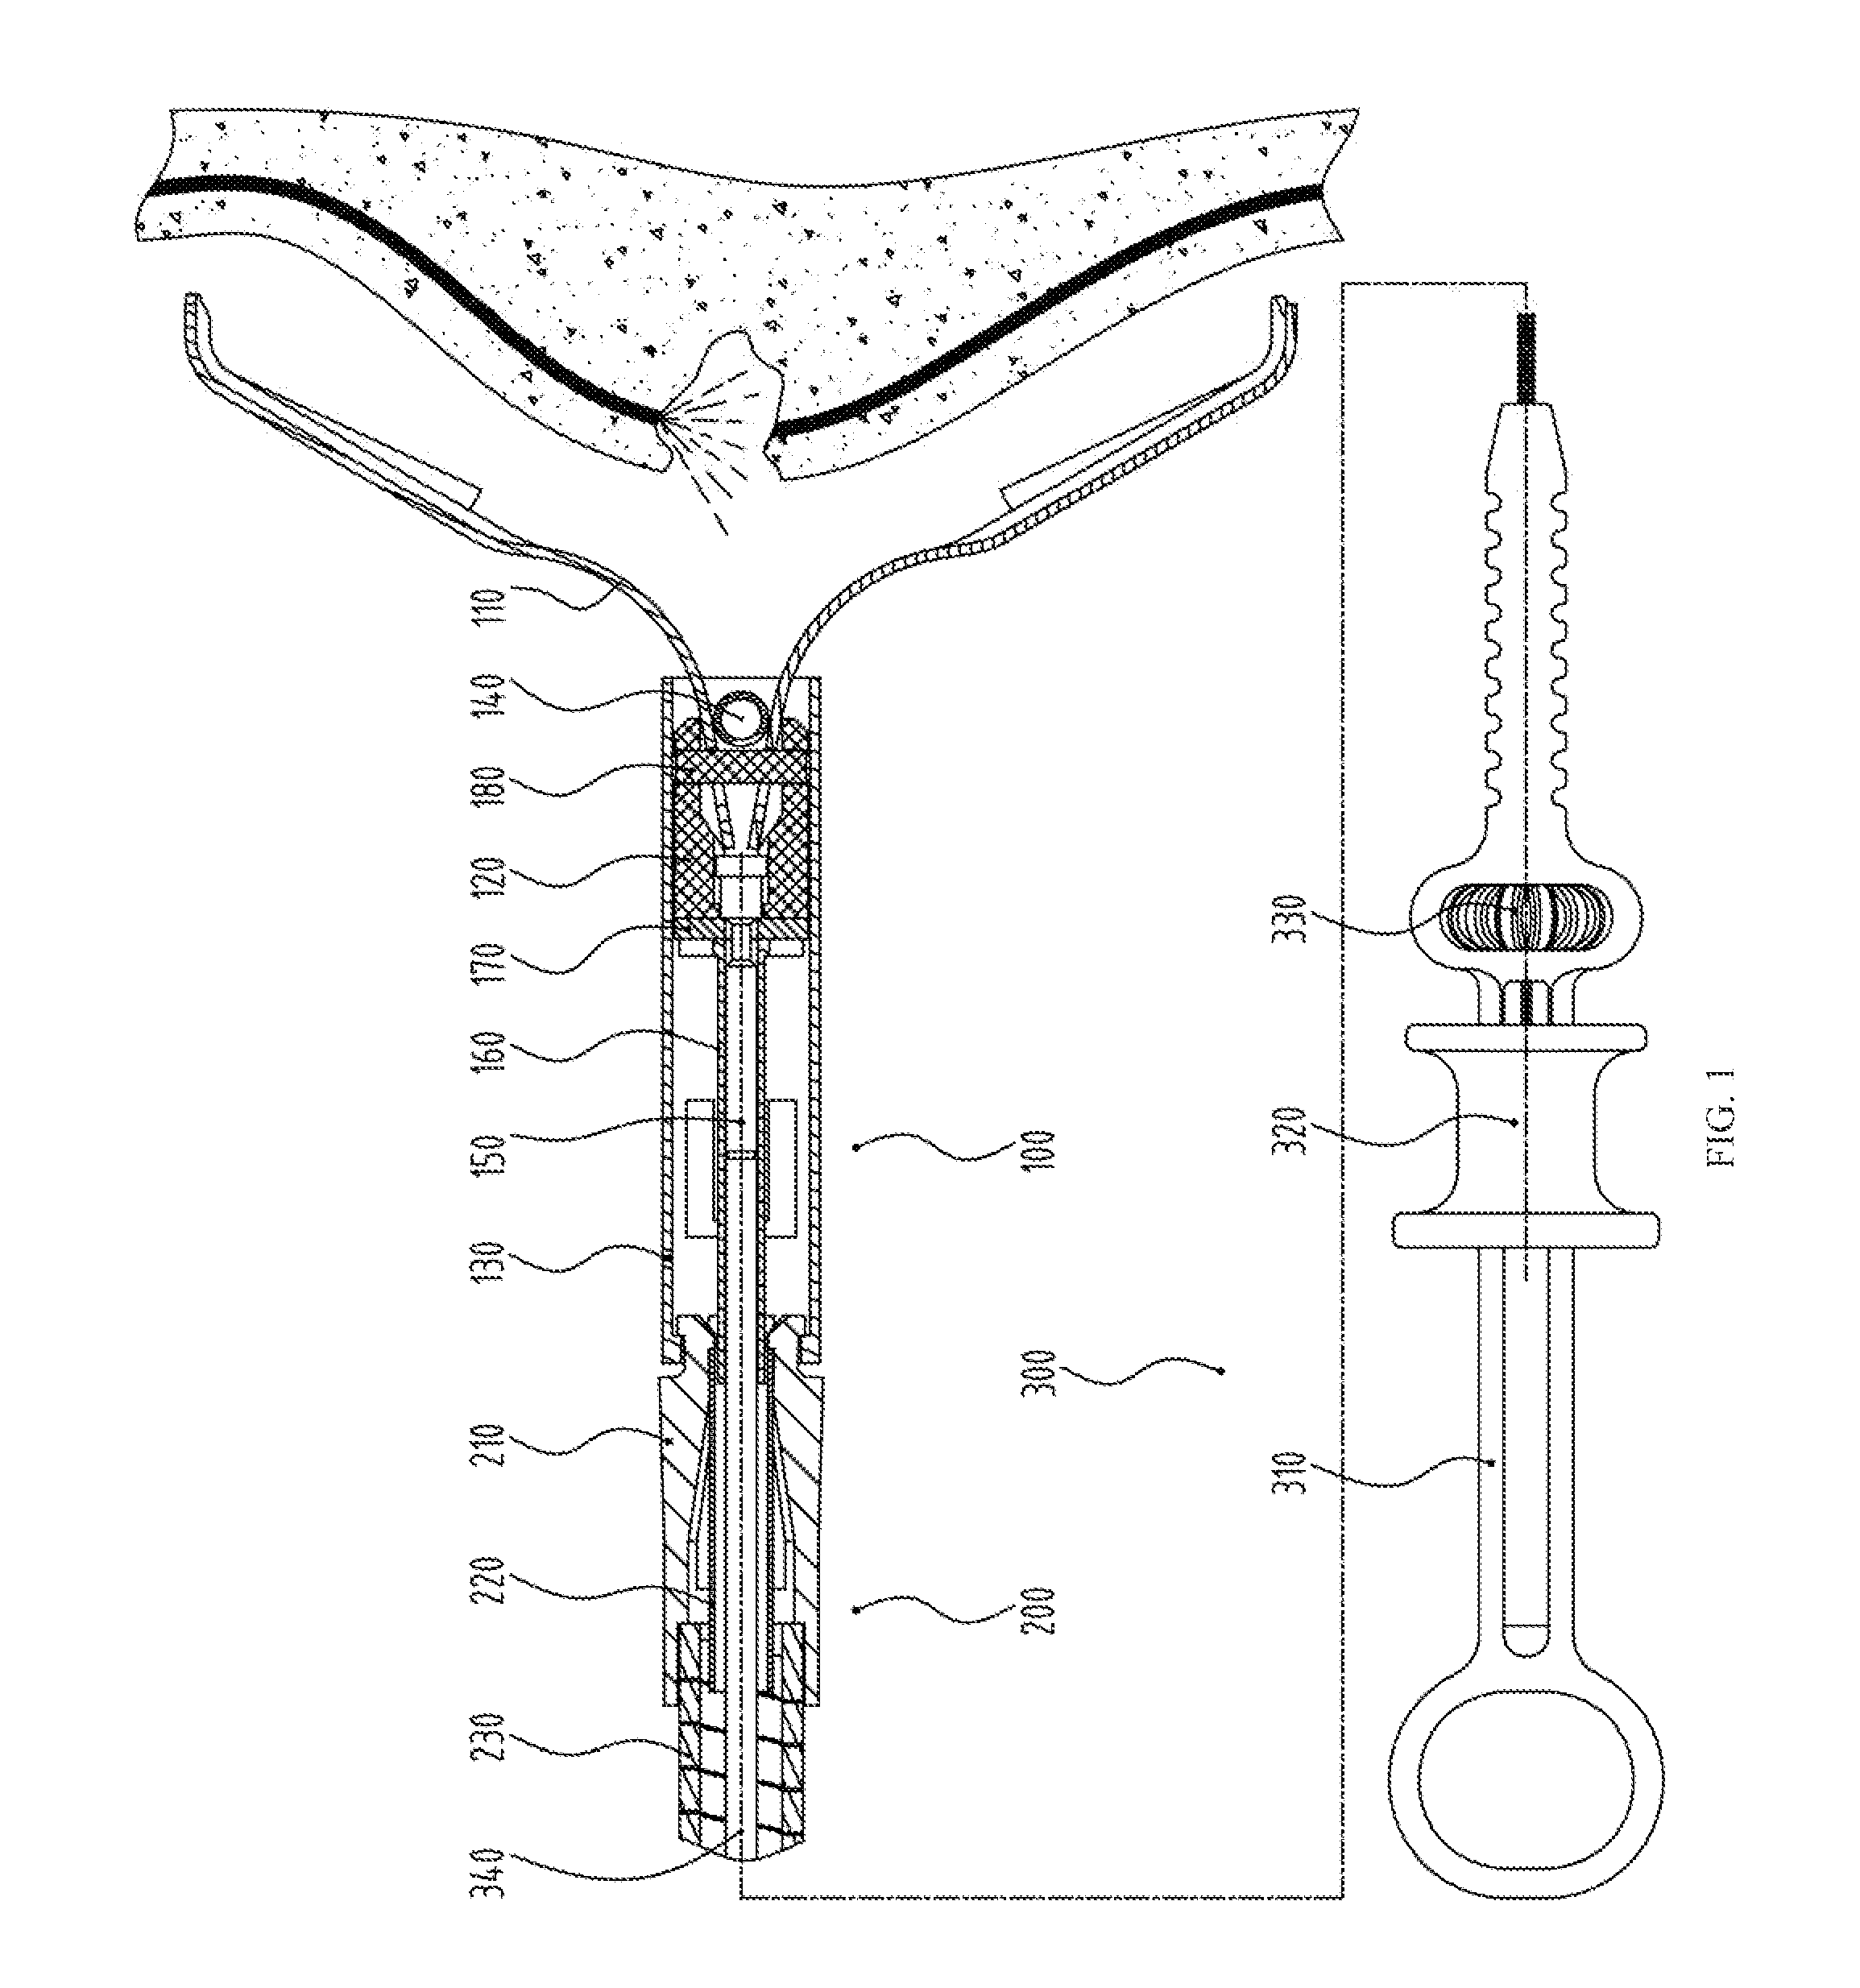 Clamp device and its clamp unit